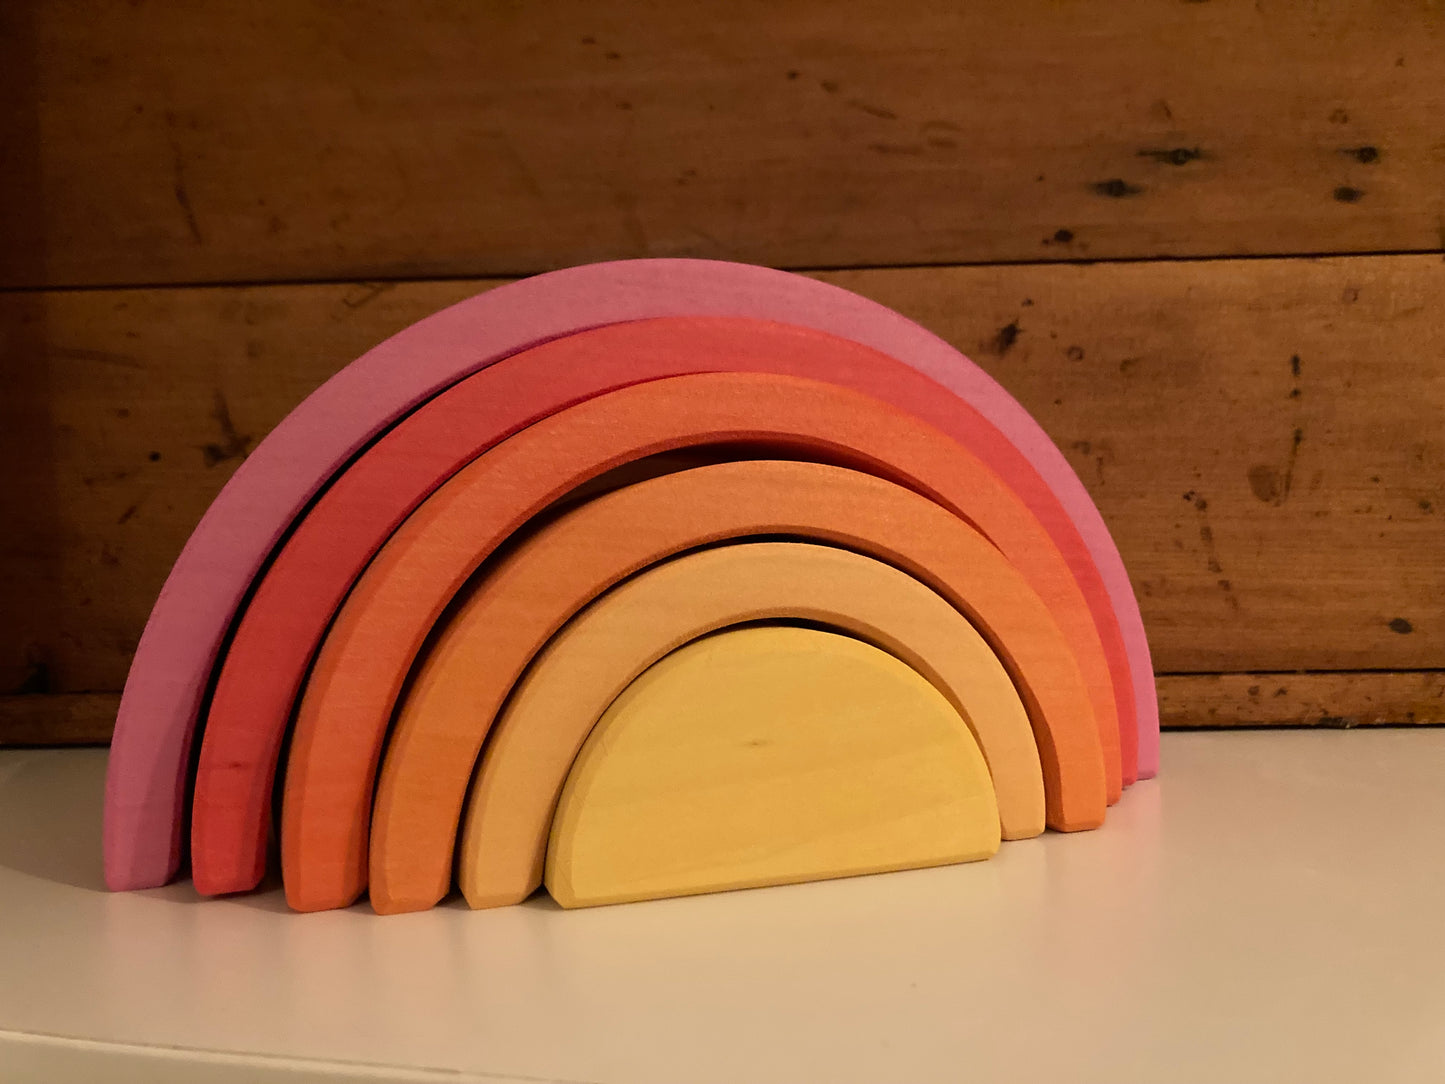 Wooden Toy - LARGE PINK NESTING TUNNEL, 6 pieces